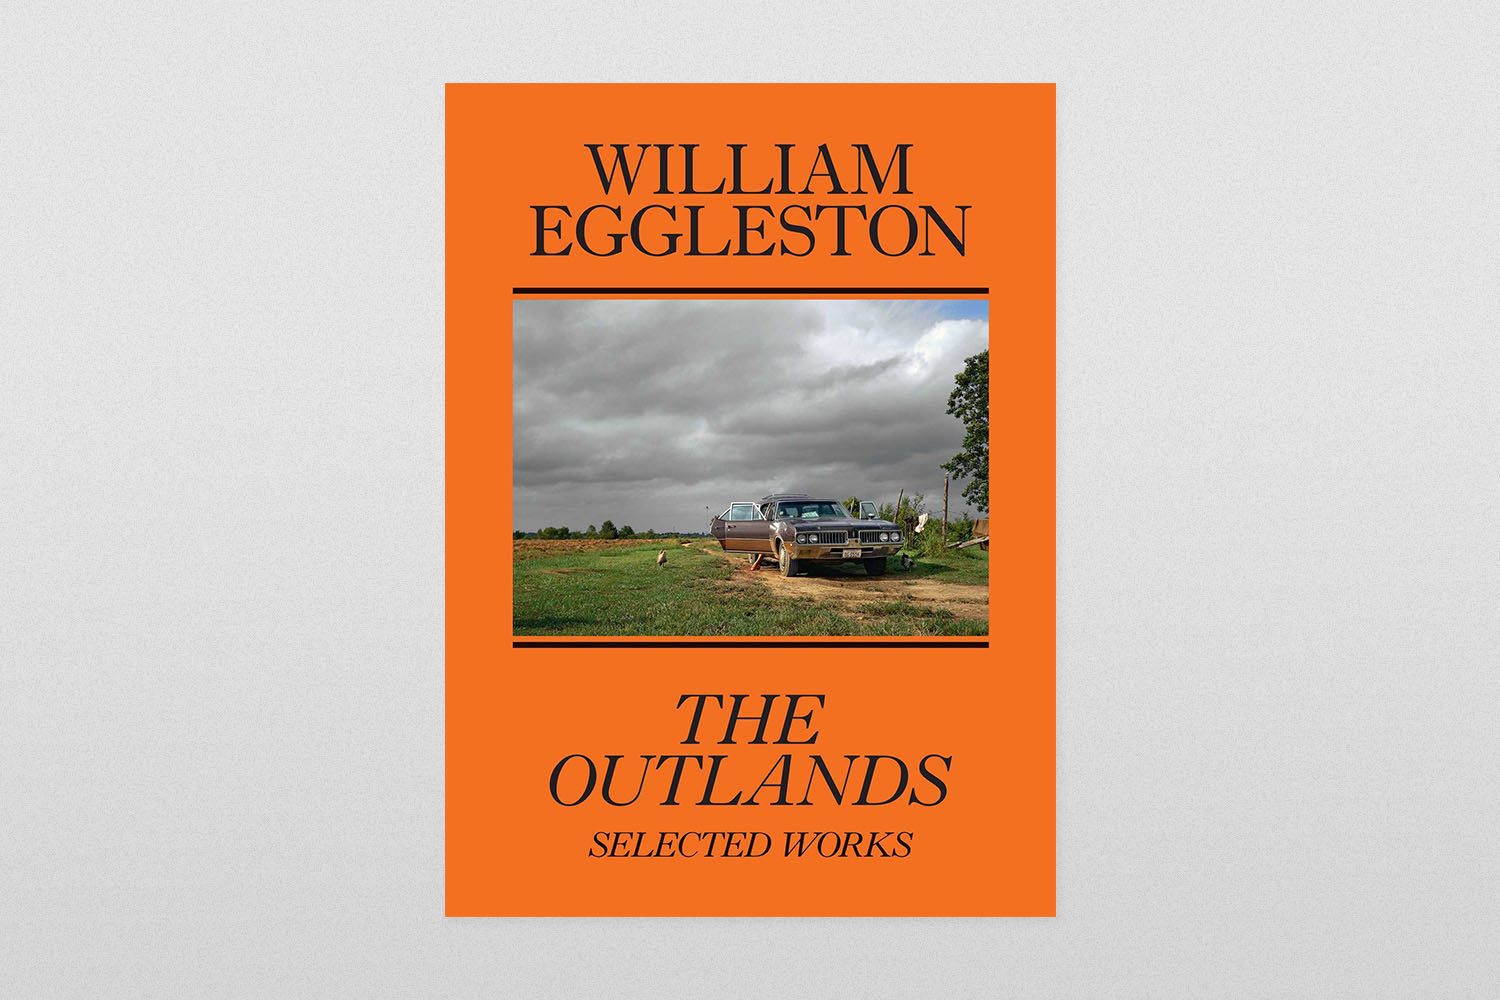 The Outlands by William Eggleston